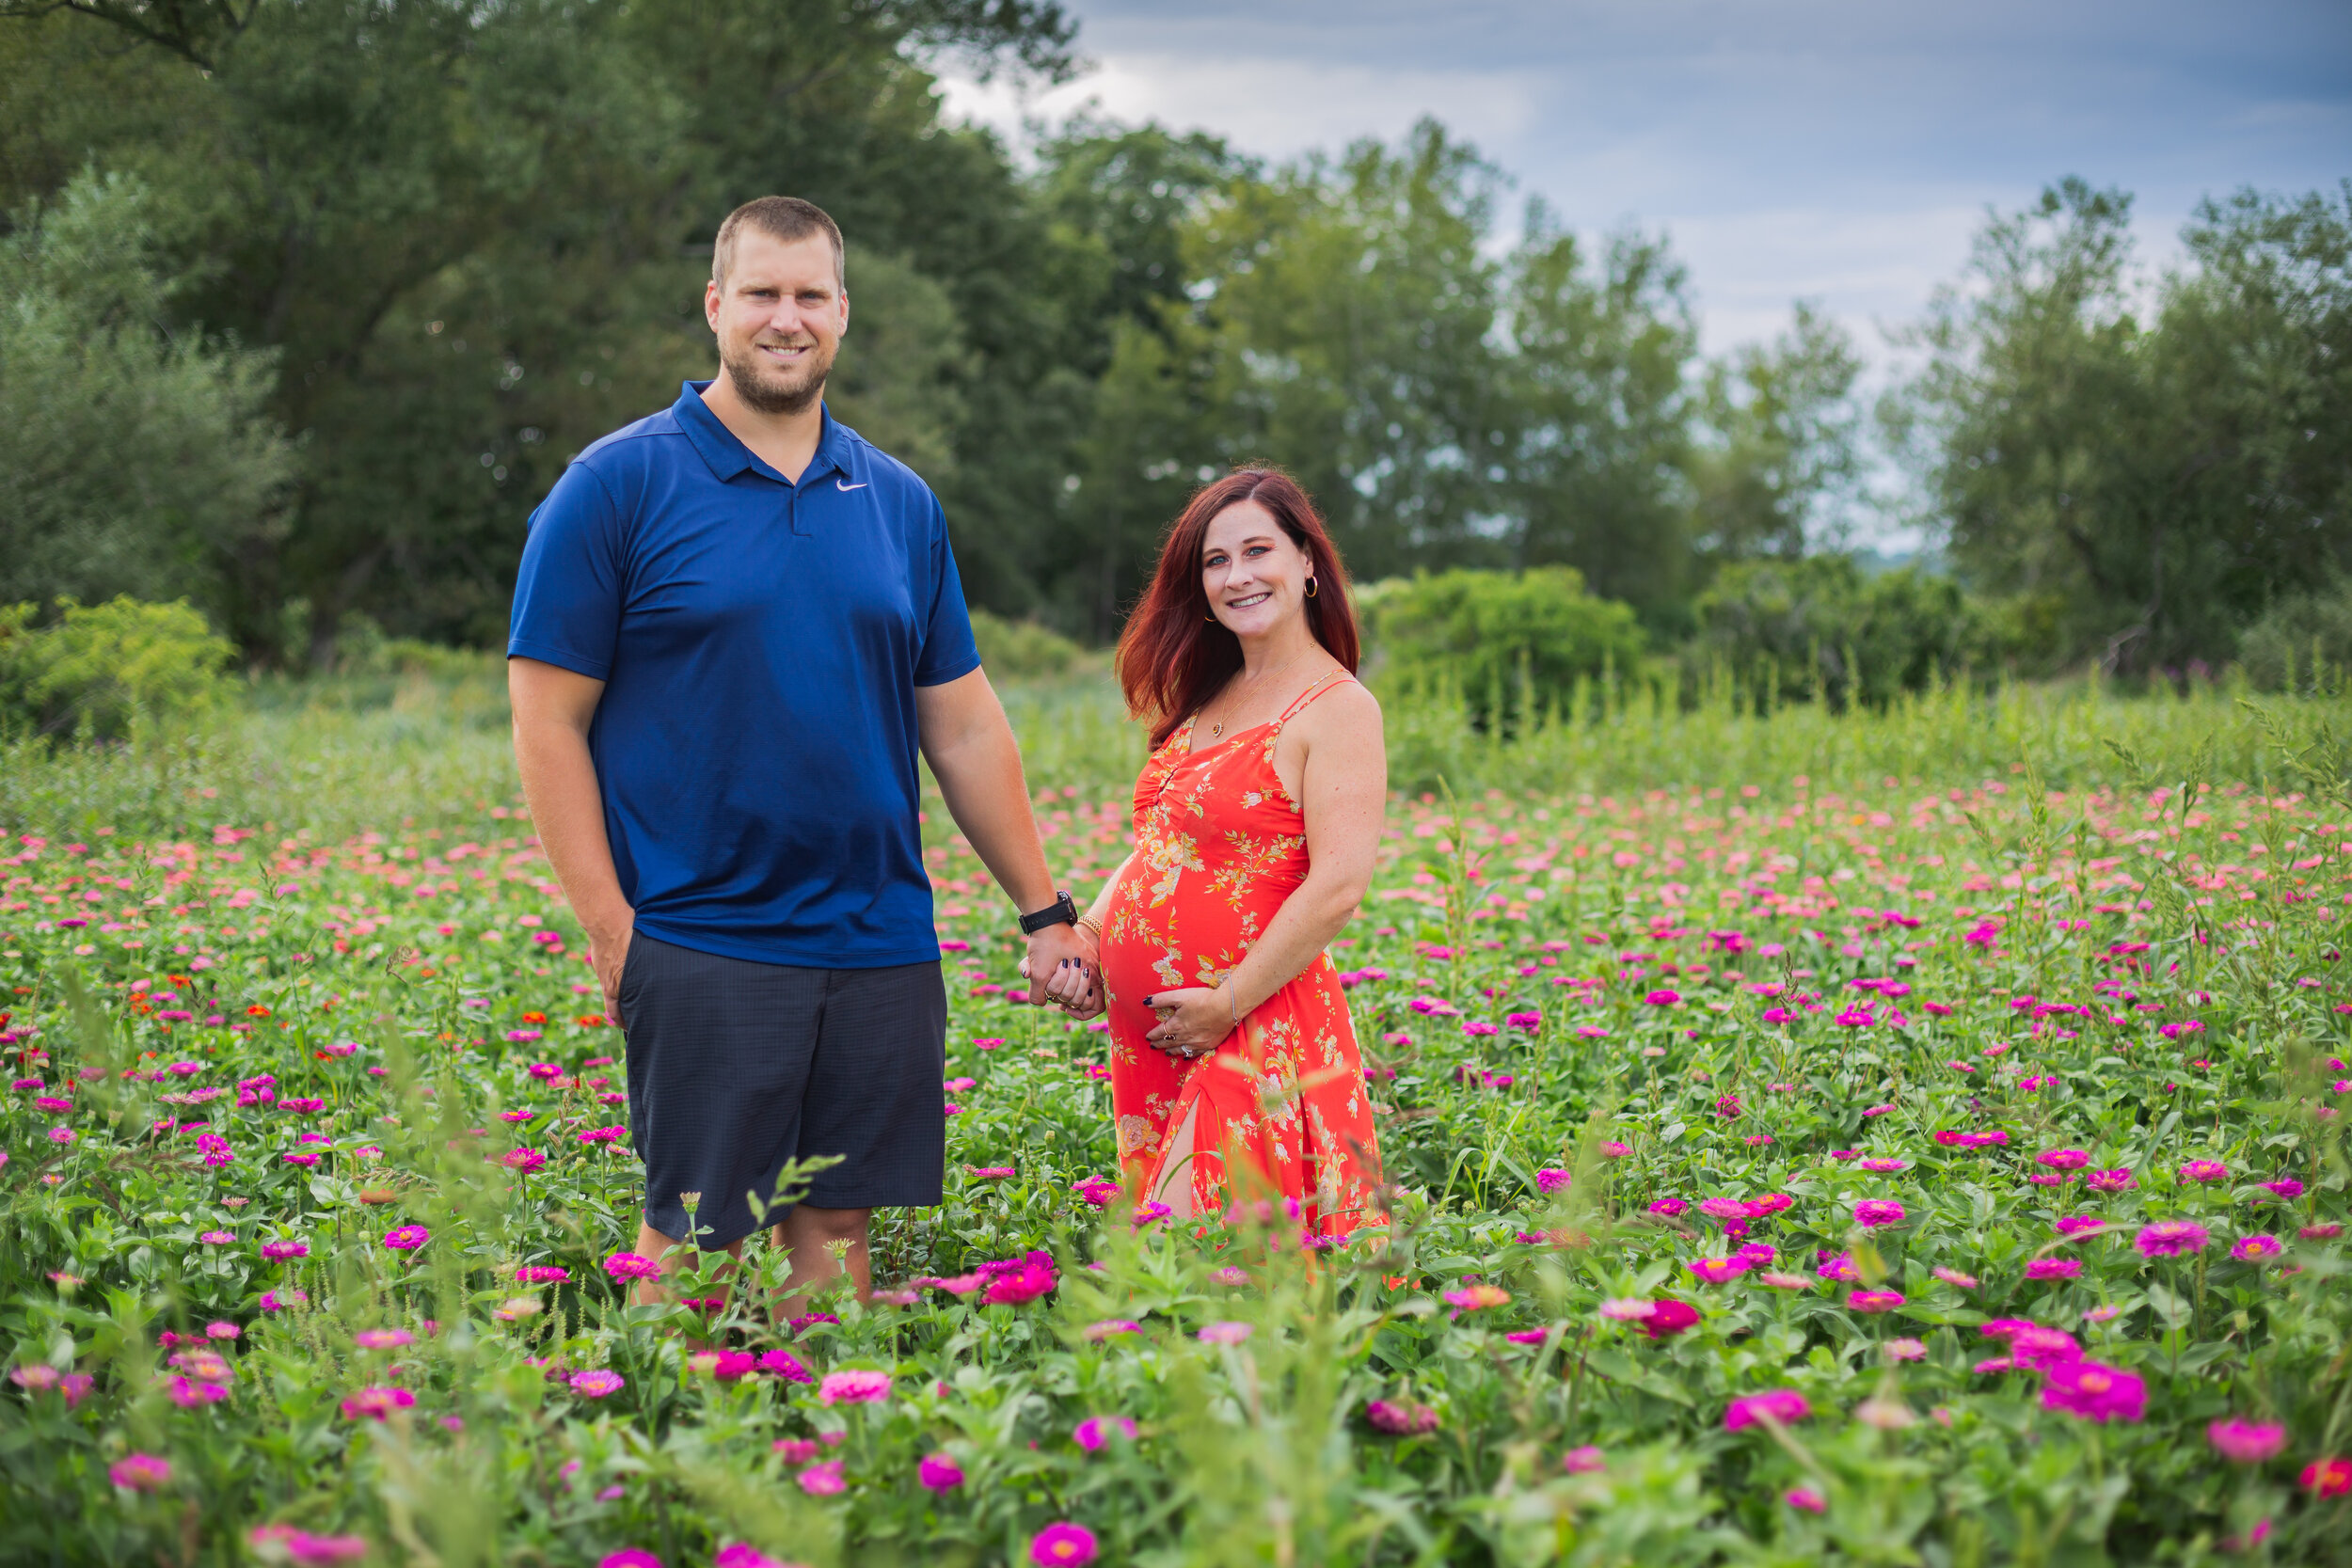 Colby Farm Sunflower Maternity Portrait Session | Stephen Grant Photography